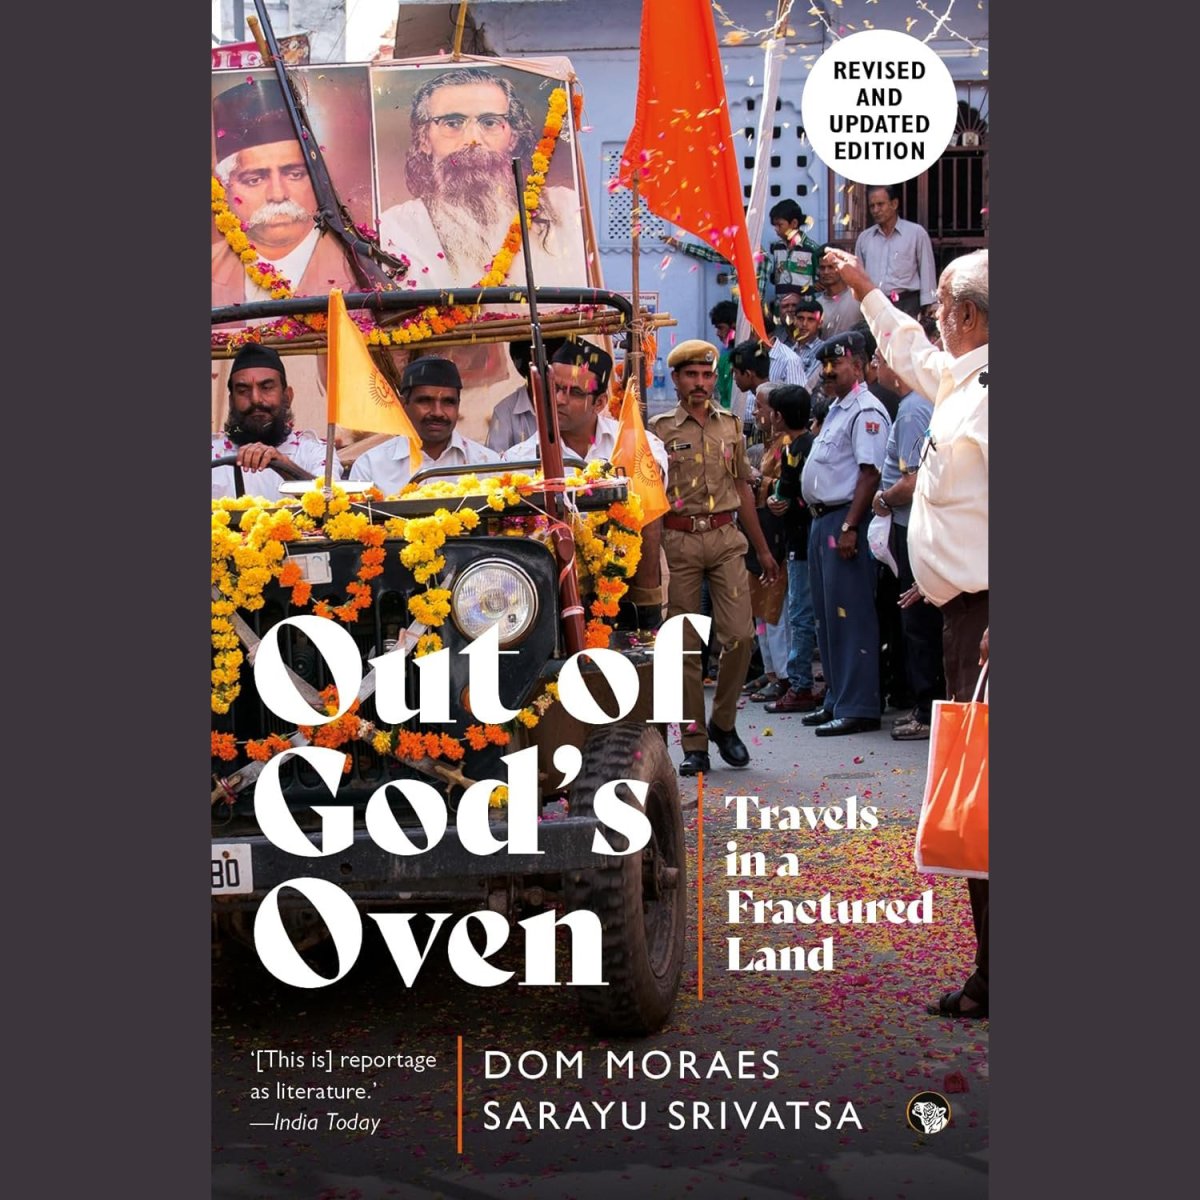 Book Review: Out of God’s Oven – Travels in a Fractured Land